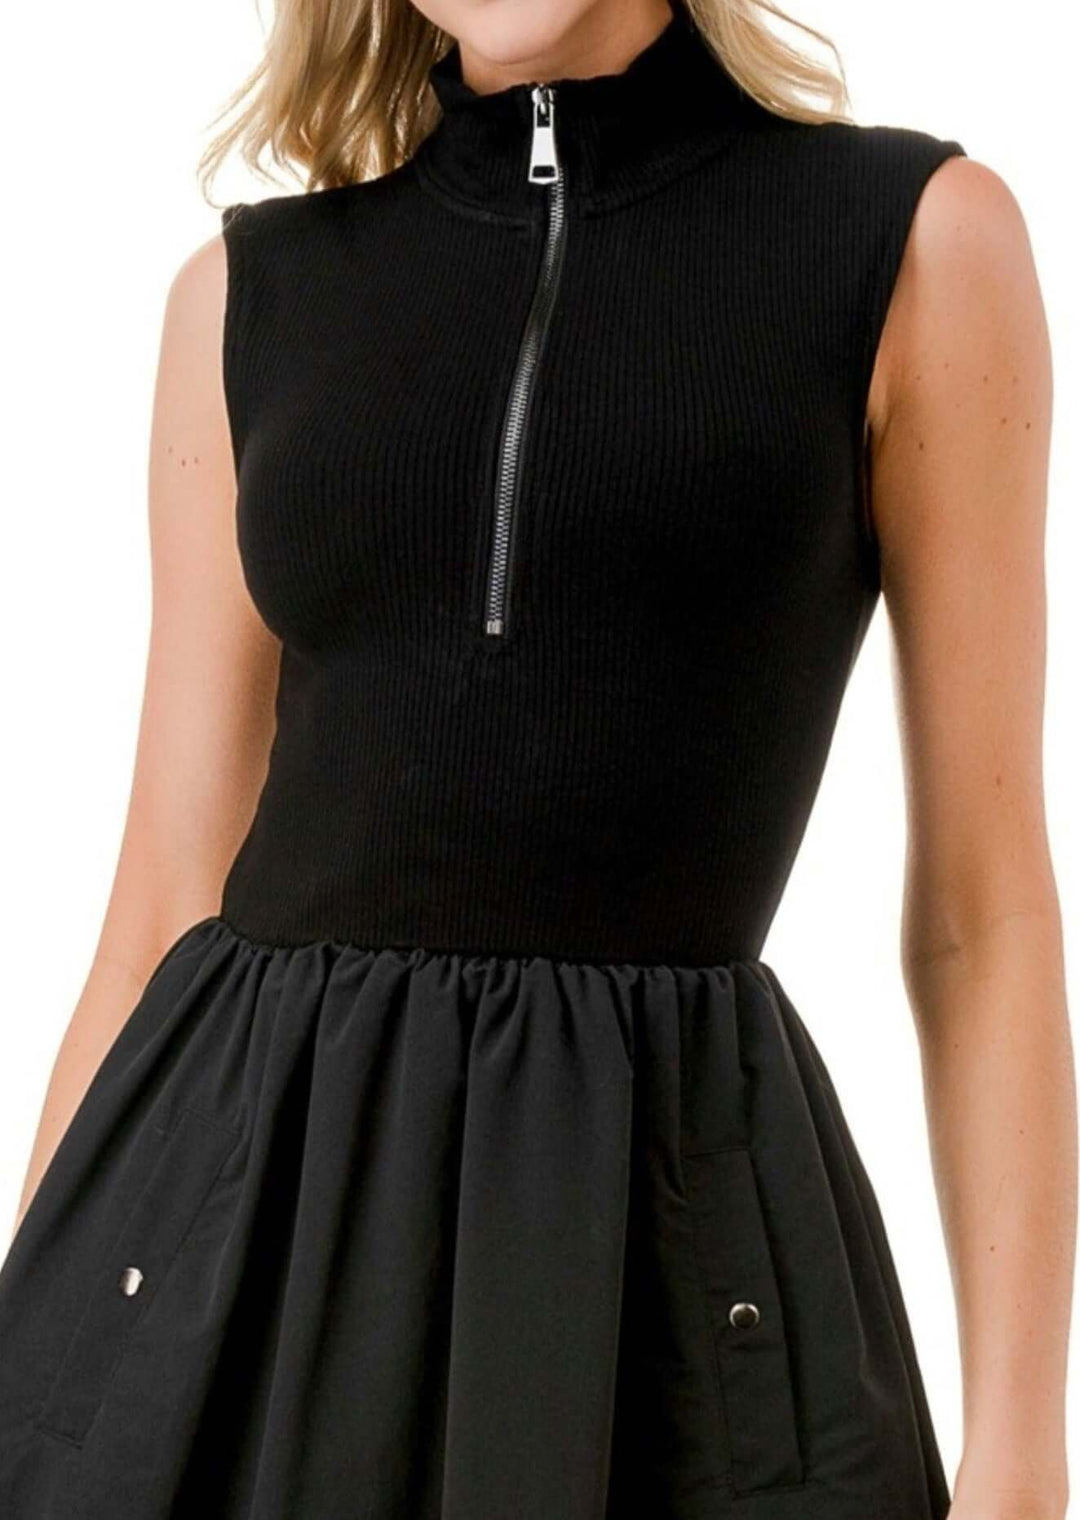 Made in USA Women's Classic Silhouette Sleeveless Fit & Flare Black Midi Dress with High Neck, Zip up Neckline and Pockets | Classy Cozy Cool Made in America Boutique